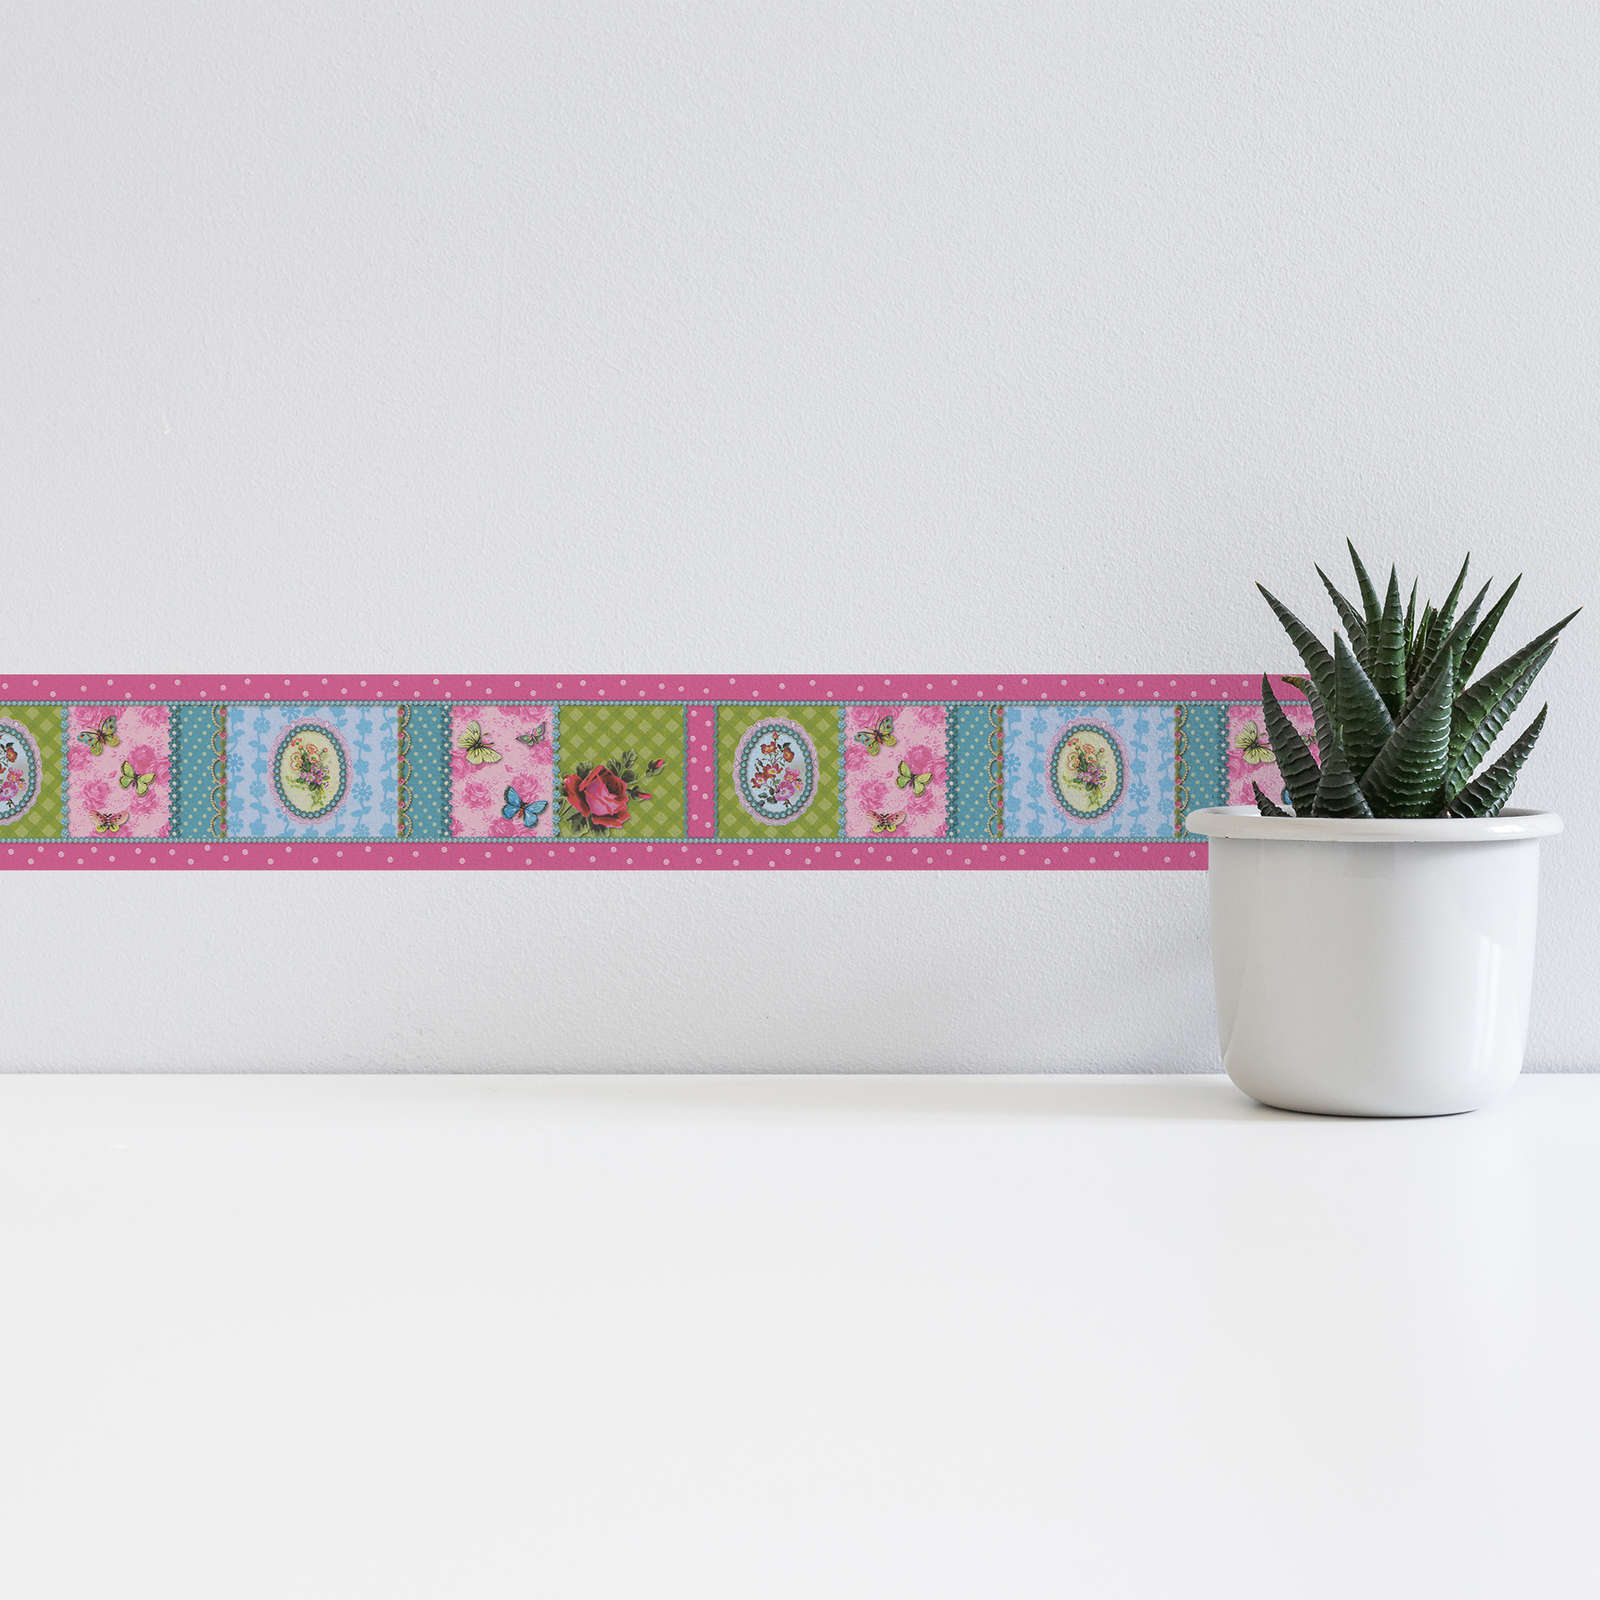             Wallpaper border OILILY pattern dots & flowers - multicoloured
        